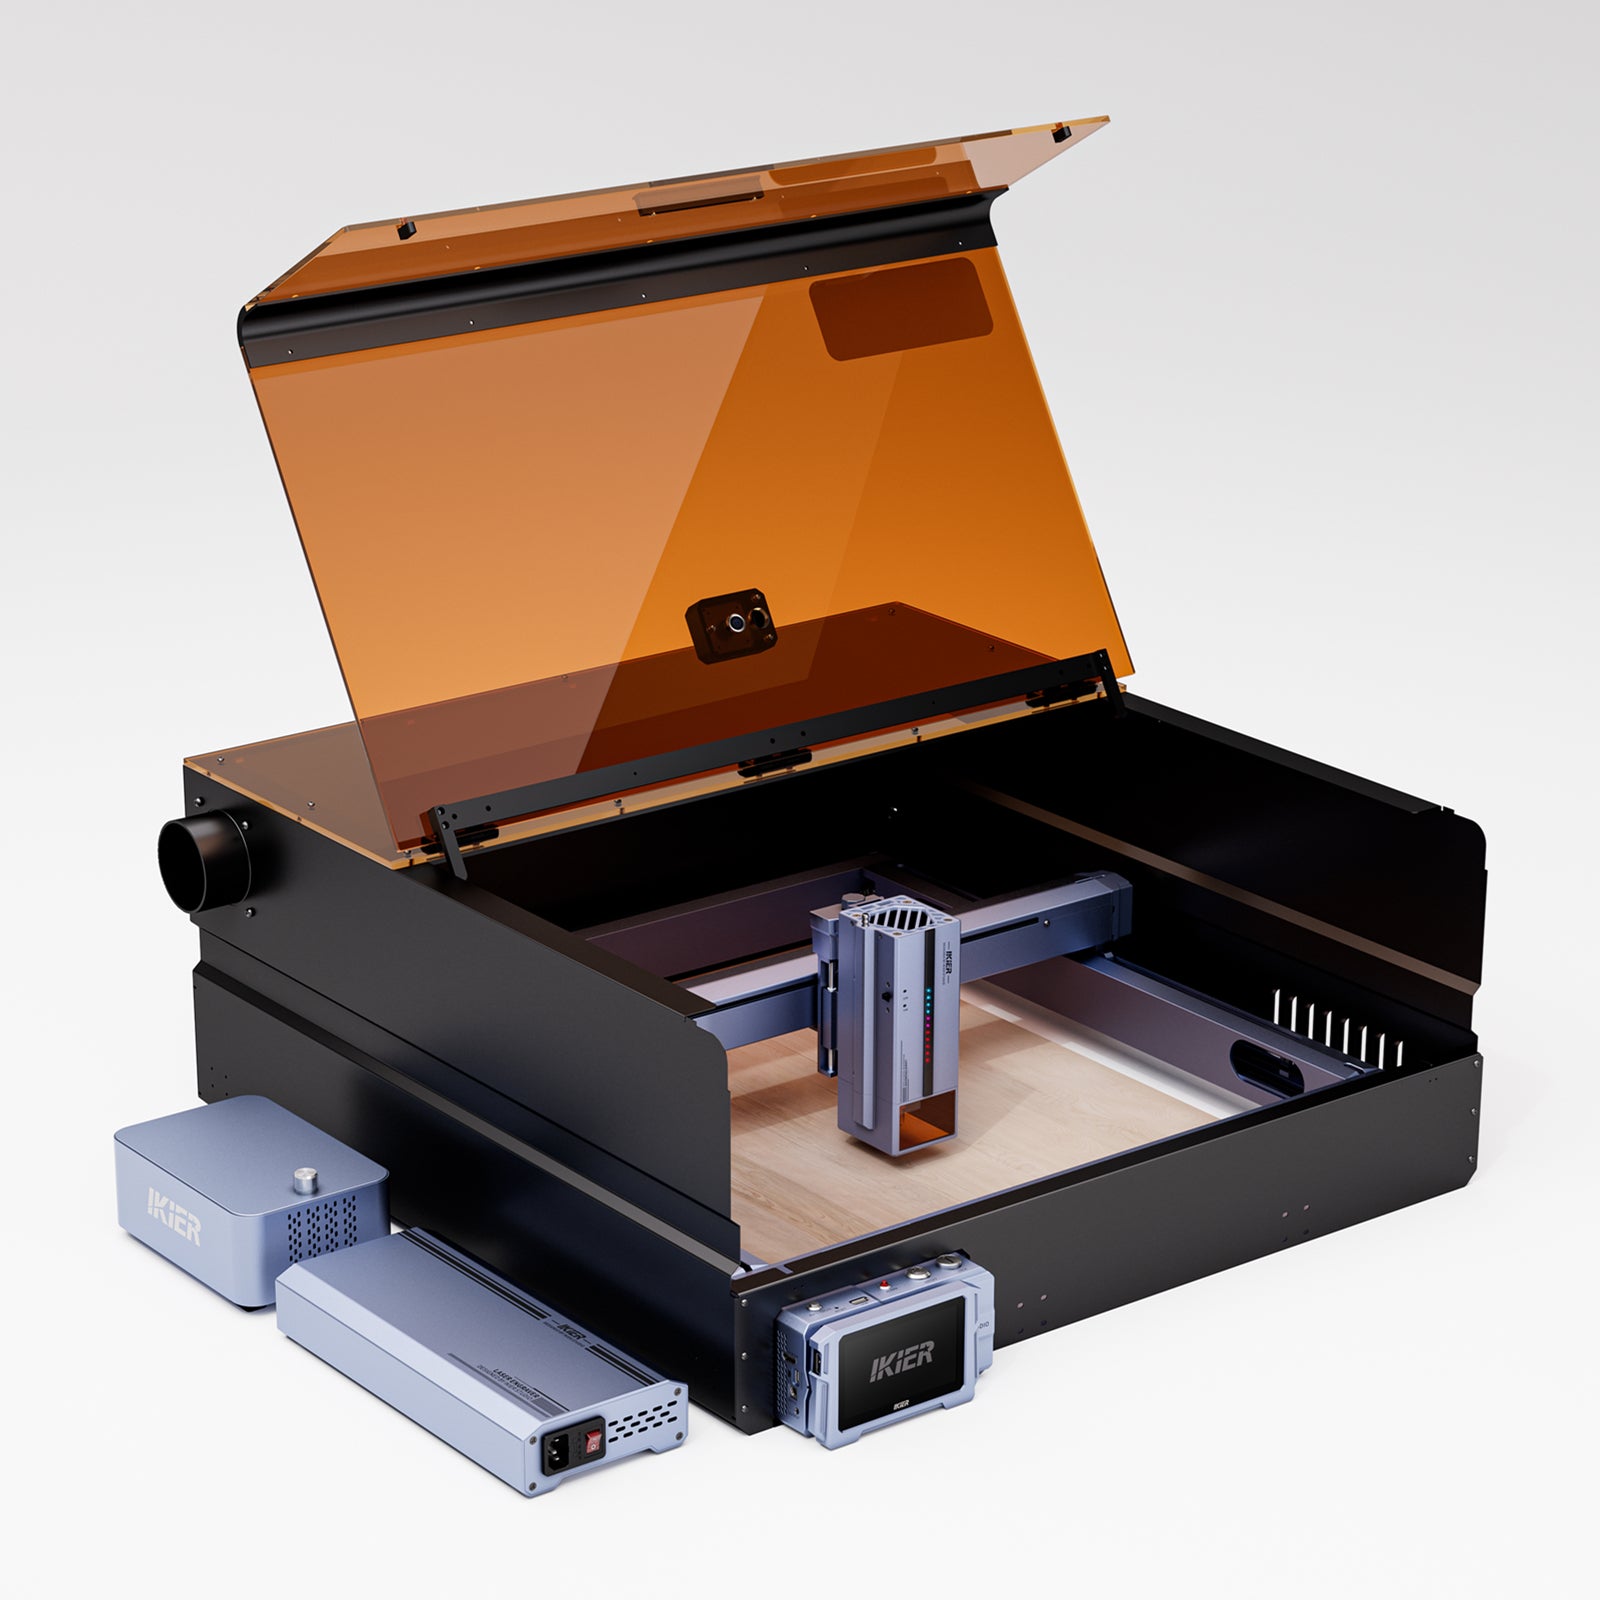 iKier E2 Enclosure with Camera For K1 Series Laser Engraver [Pre-order]